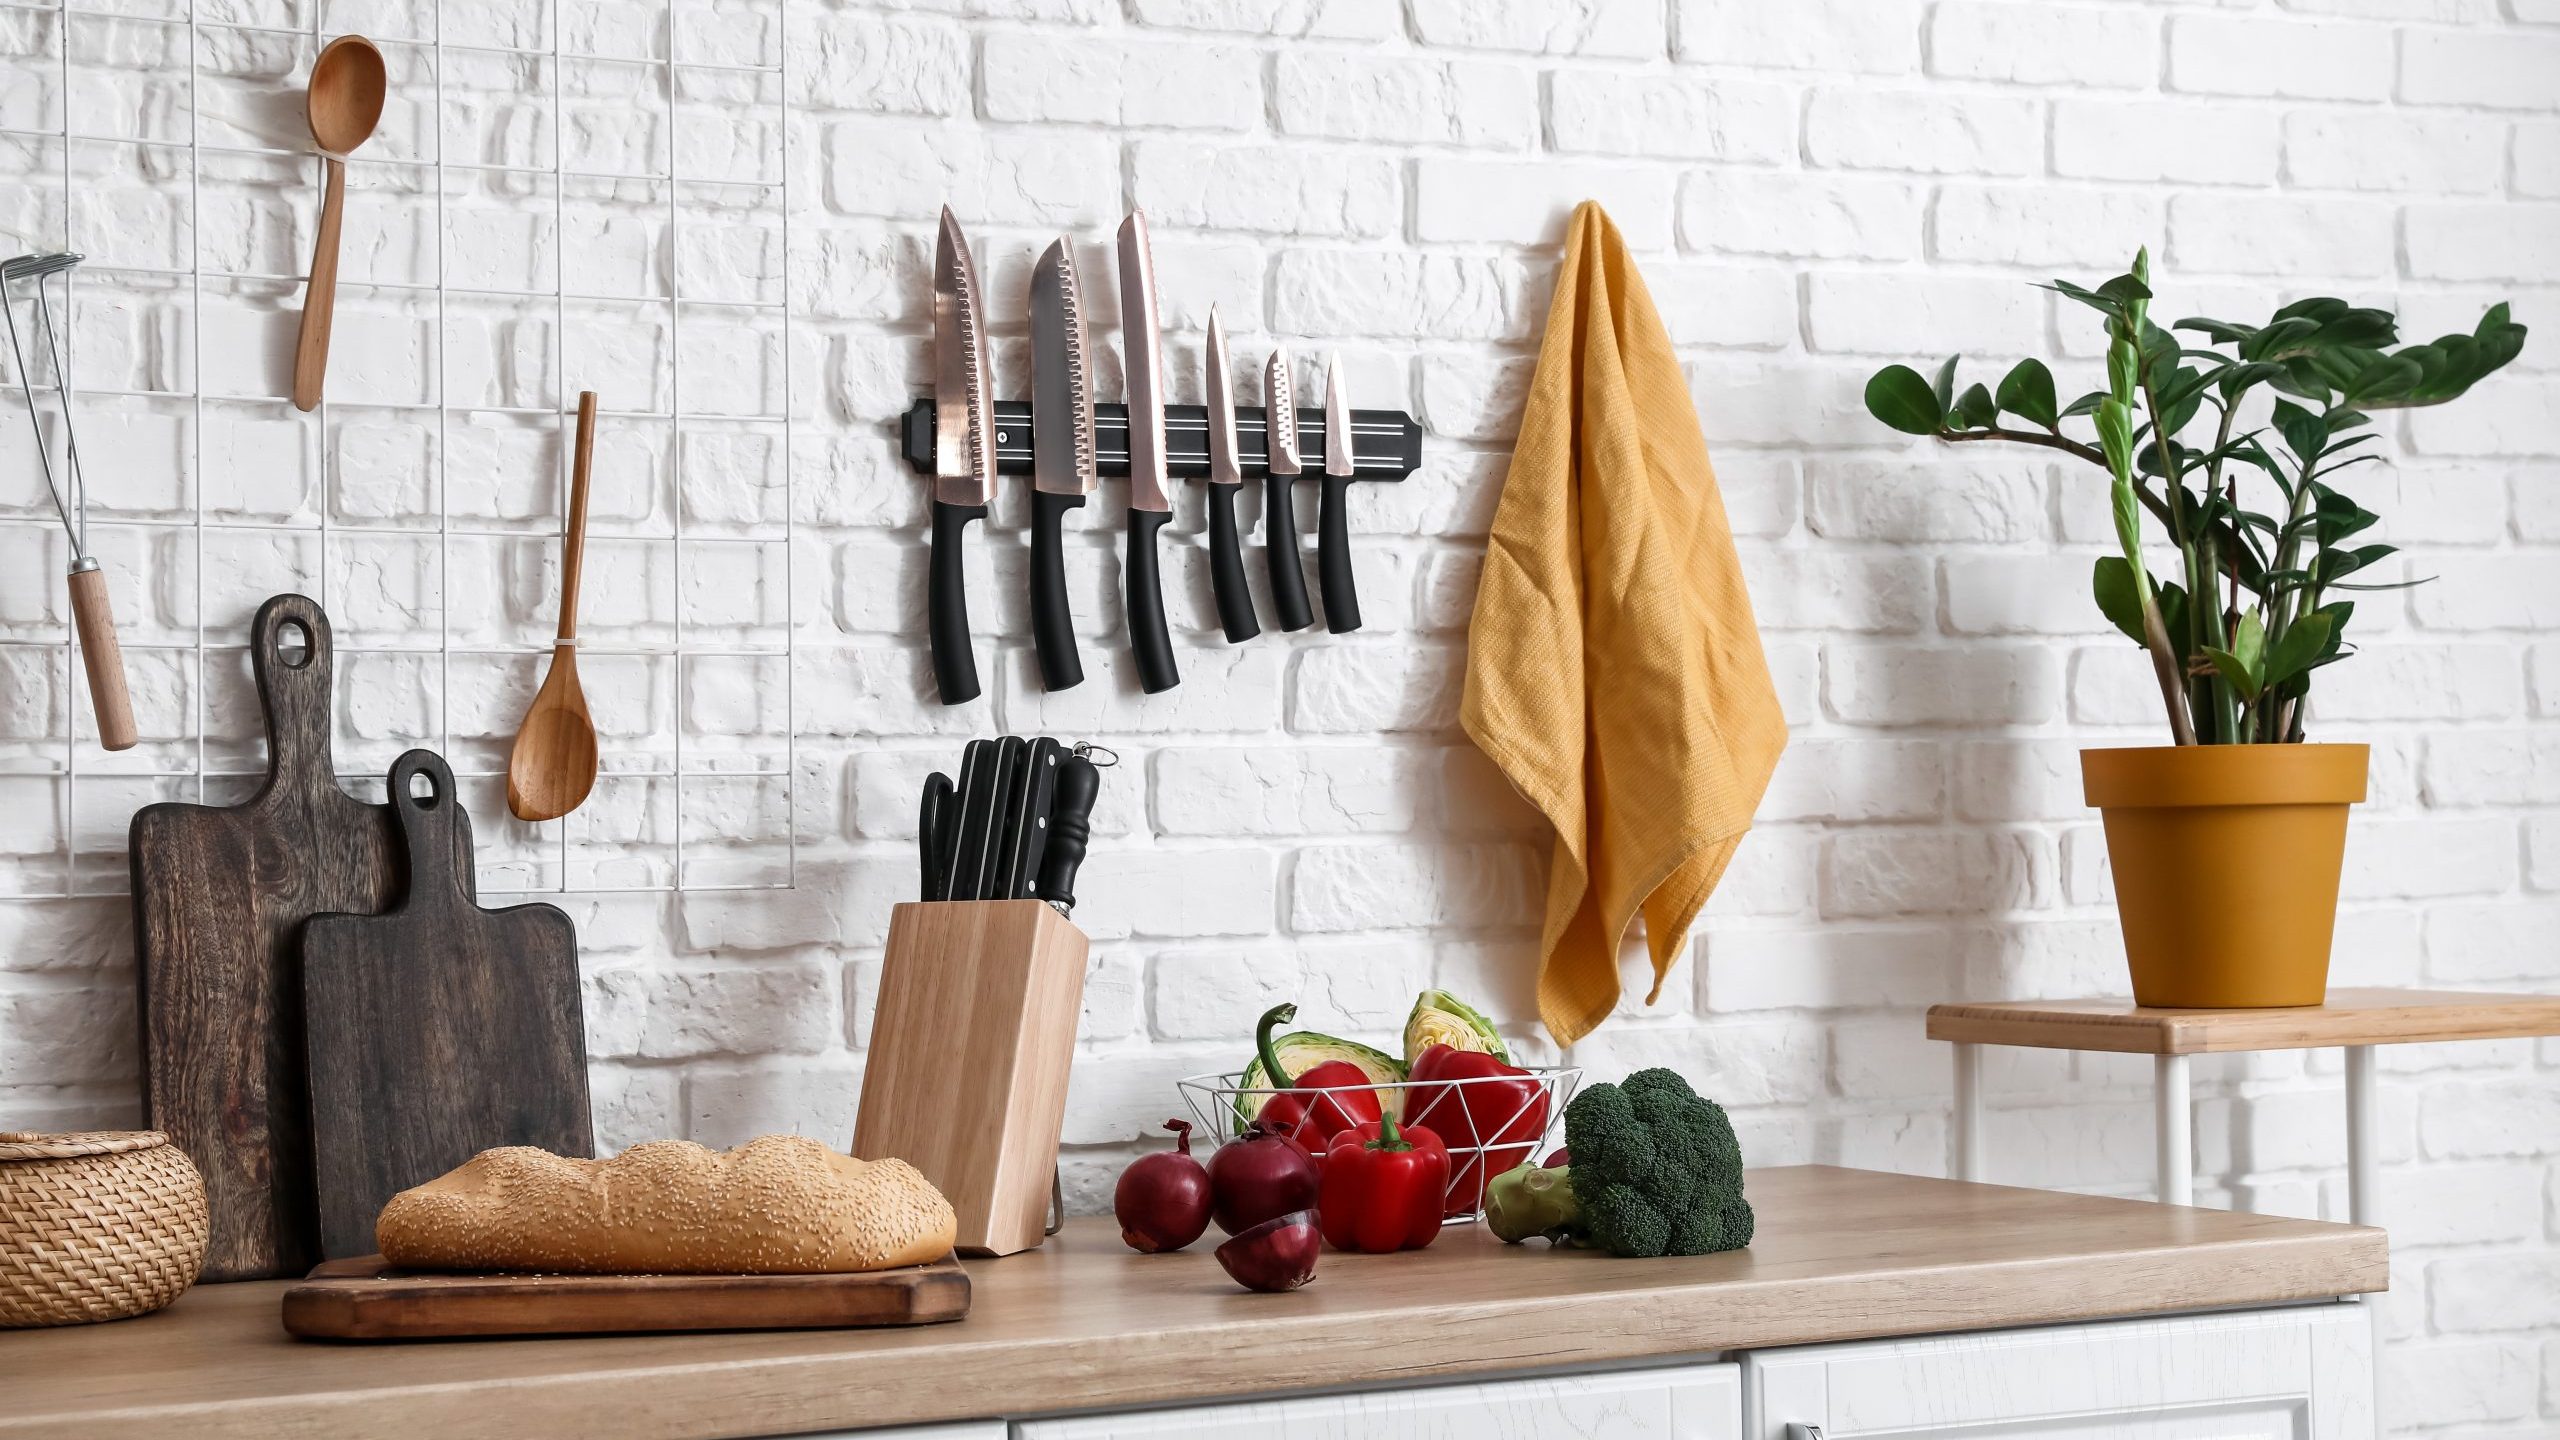 Knives in kitchen